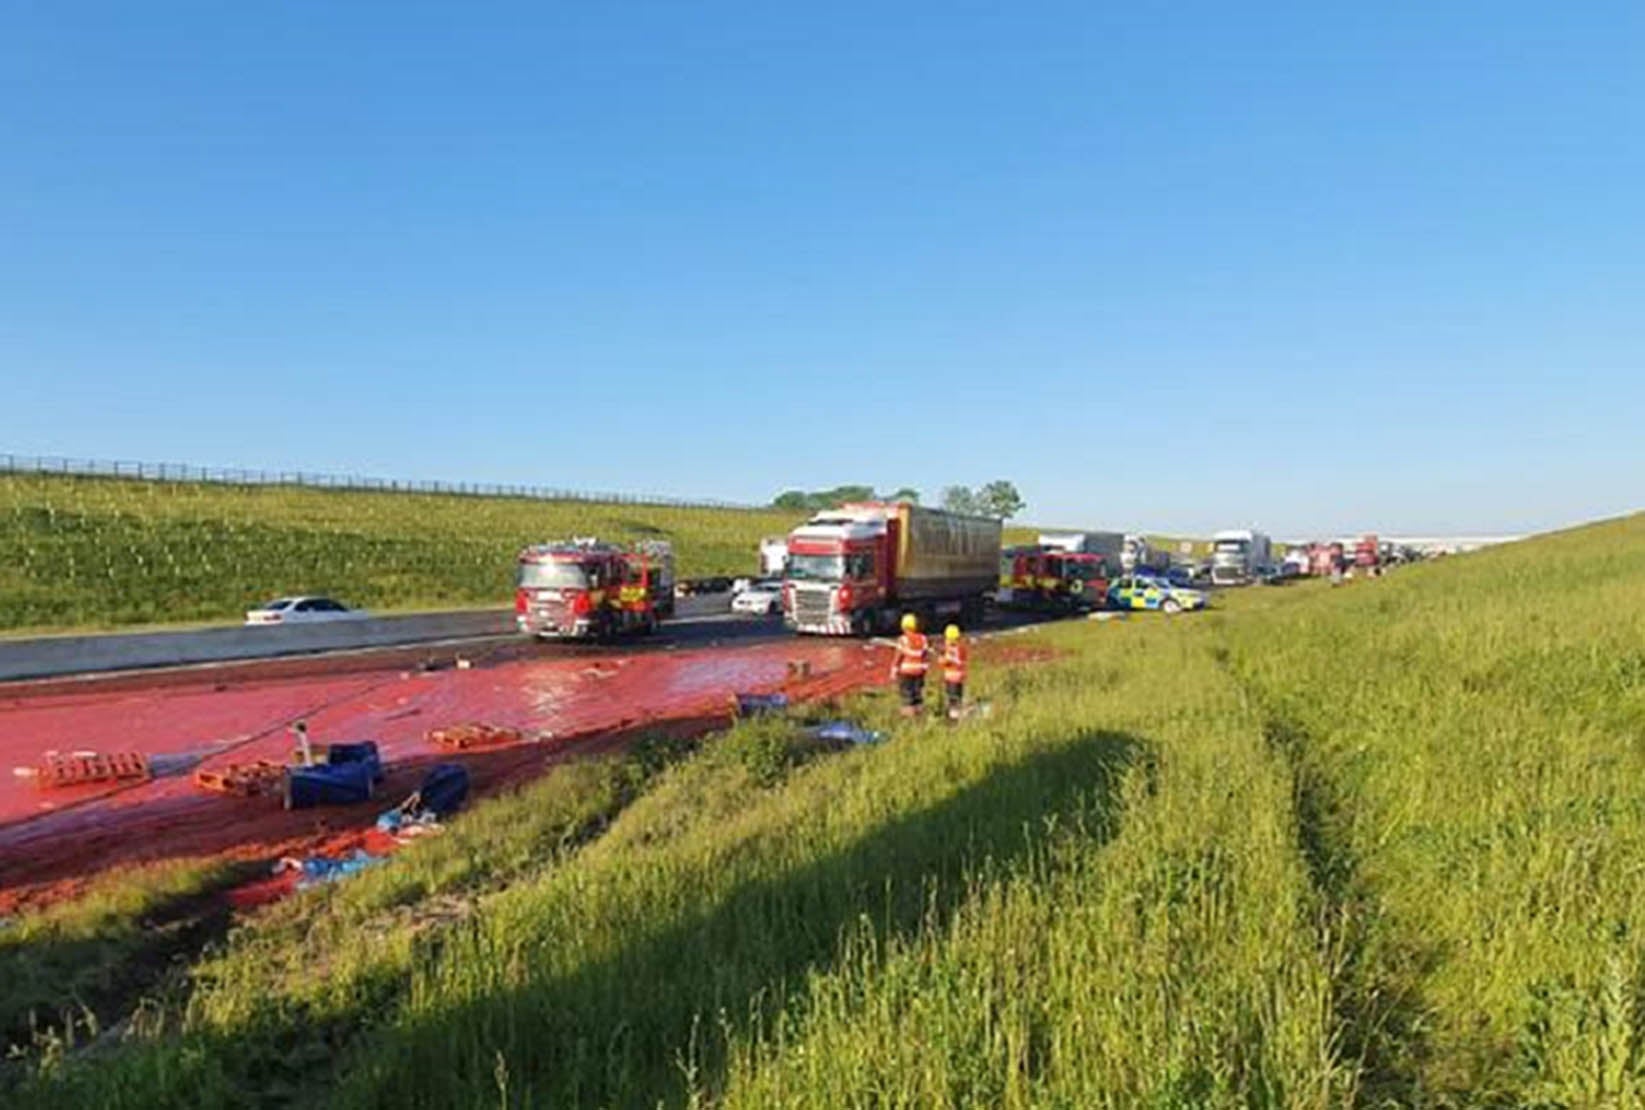 A stretch of the A14 in Cambridgeshire was closed for emergency resurfacing after the tomato puree spillage